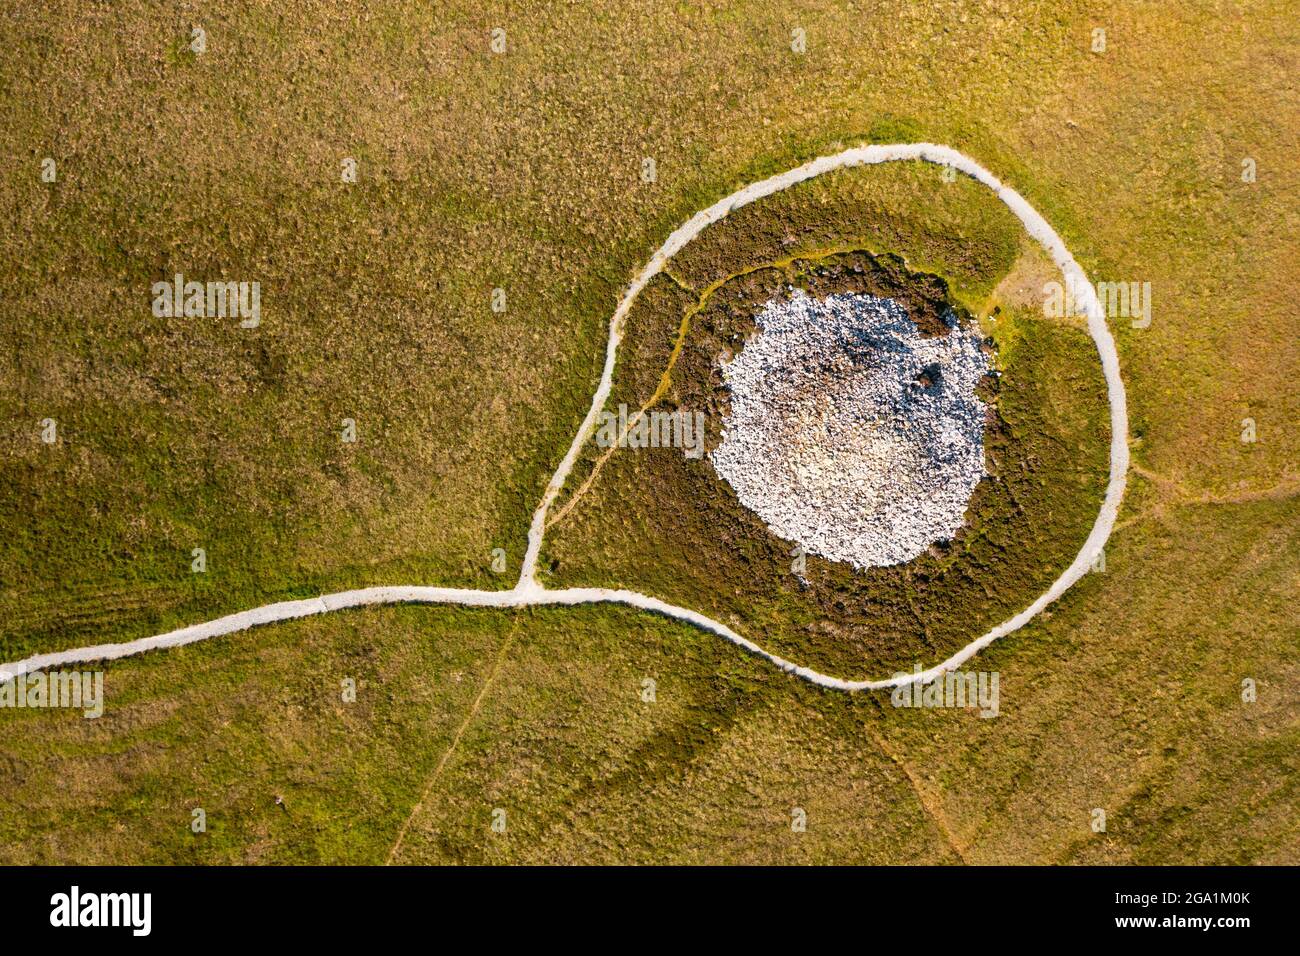 Aerial view from drone of the best preserved Neolithic chambered cairn in the Outer Hebrides at Langass on North Uist, Outer Hebrides, Scotland, UK Stock Photo